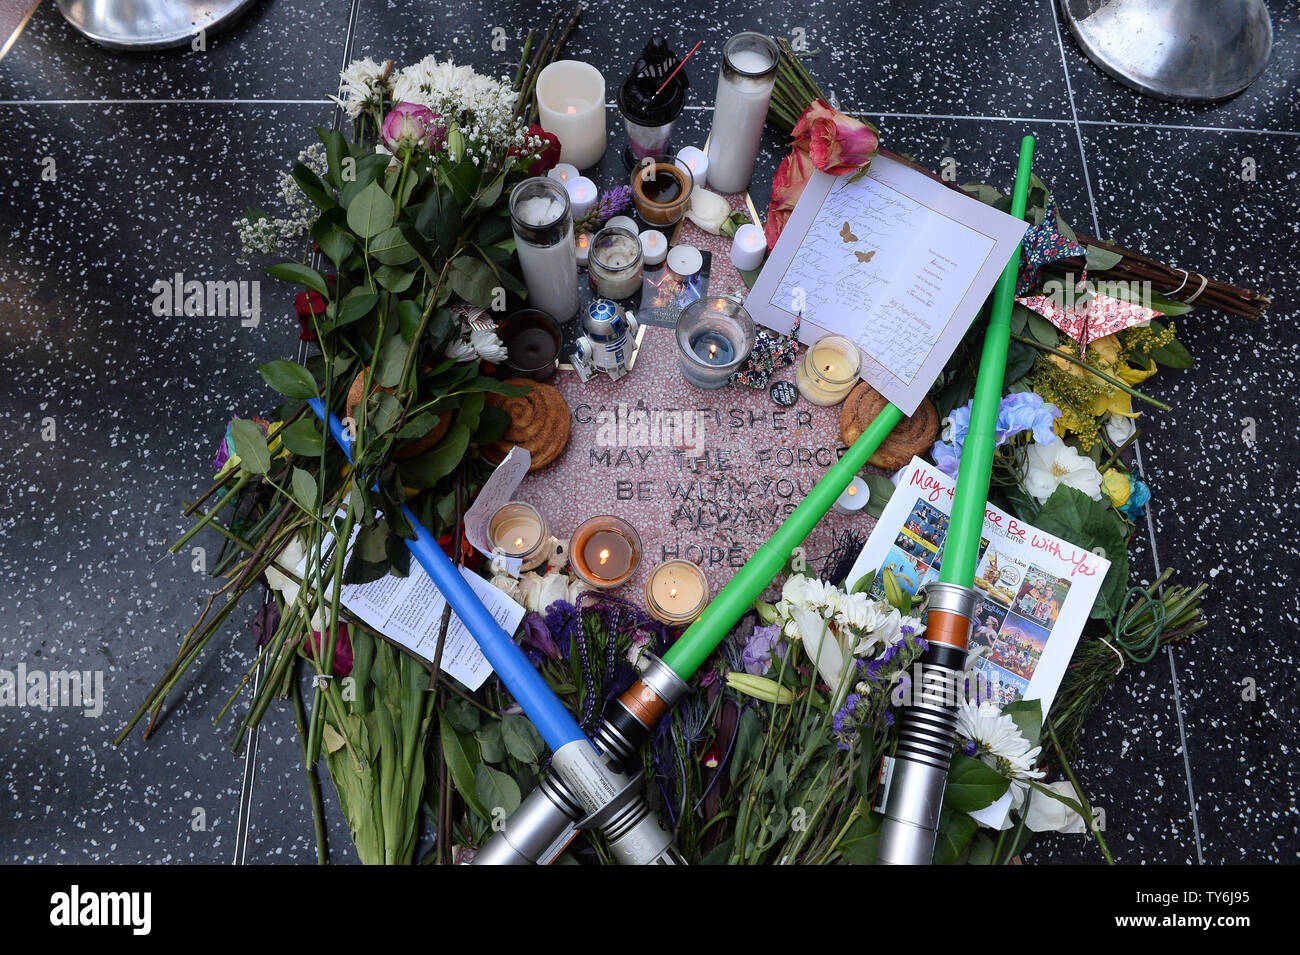 Fans gather around an impromptu Hollywood Walk of Fame Star memorial to pay tribute to 'Star Wars' actress and author Carrie Fisher, who died at age 60 Tuesday, one day before her mother, actress Debbie Reynolds died in Los Angeles on December 29, 2016.  Photo by Jim Ruymen/UPI Stock Photo